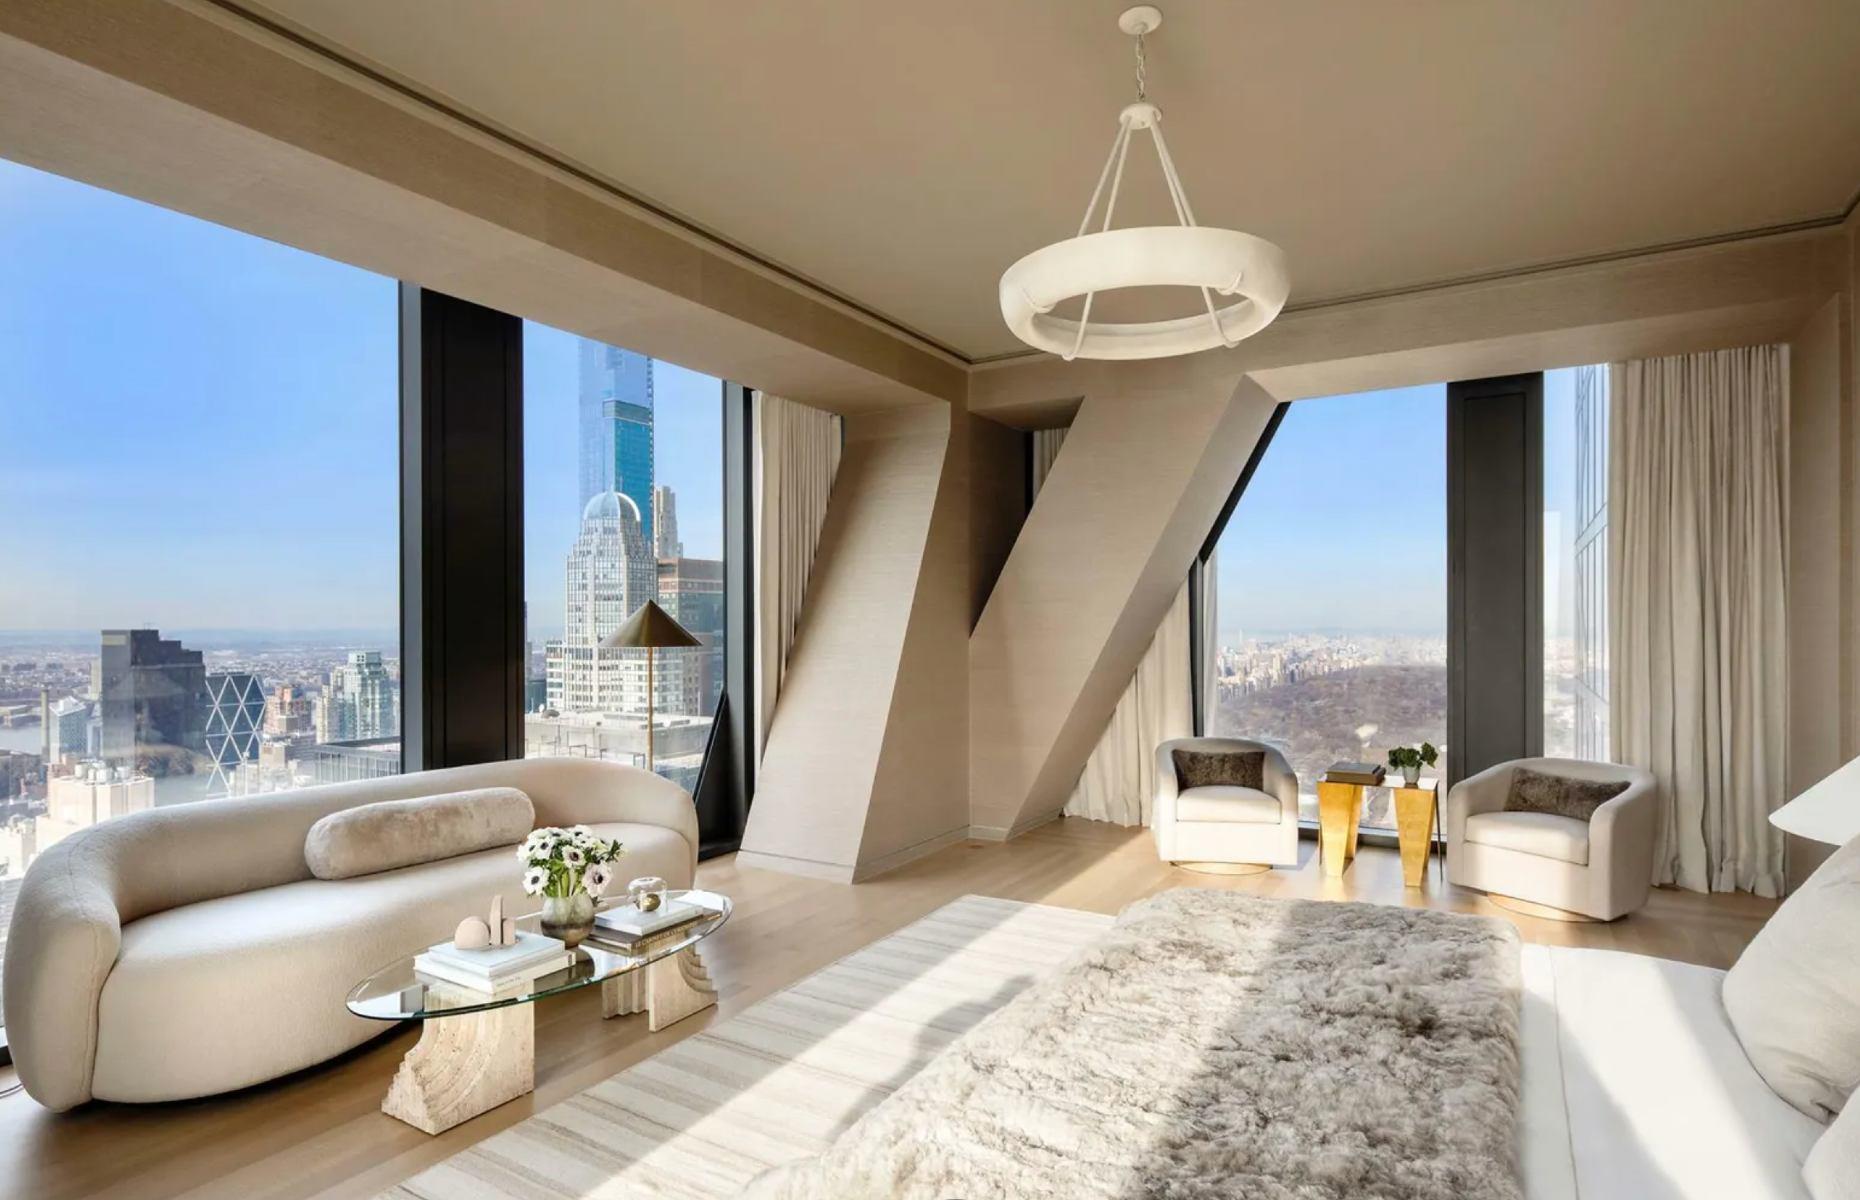 <p>In addition to the triple-glazed floor-to-ceiling windows, providing residents with alternative views out to the Hudson River, most rooms make a feature of the building’s distinctive diagonal structural columns, while a soft cream palette and museum-quality finishes create an atmosphere of modern glamor and timeless elegance. </p>